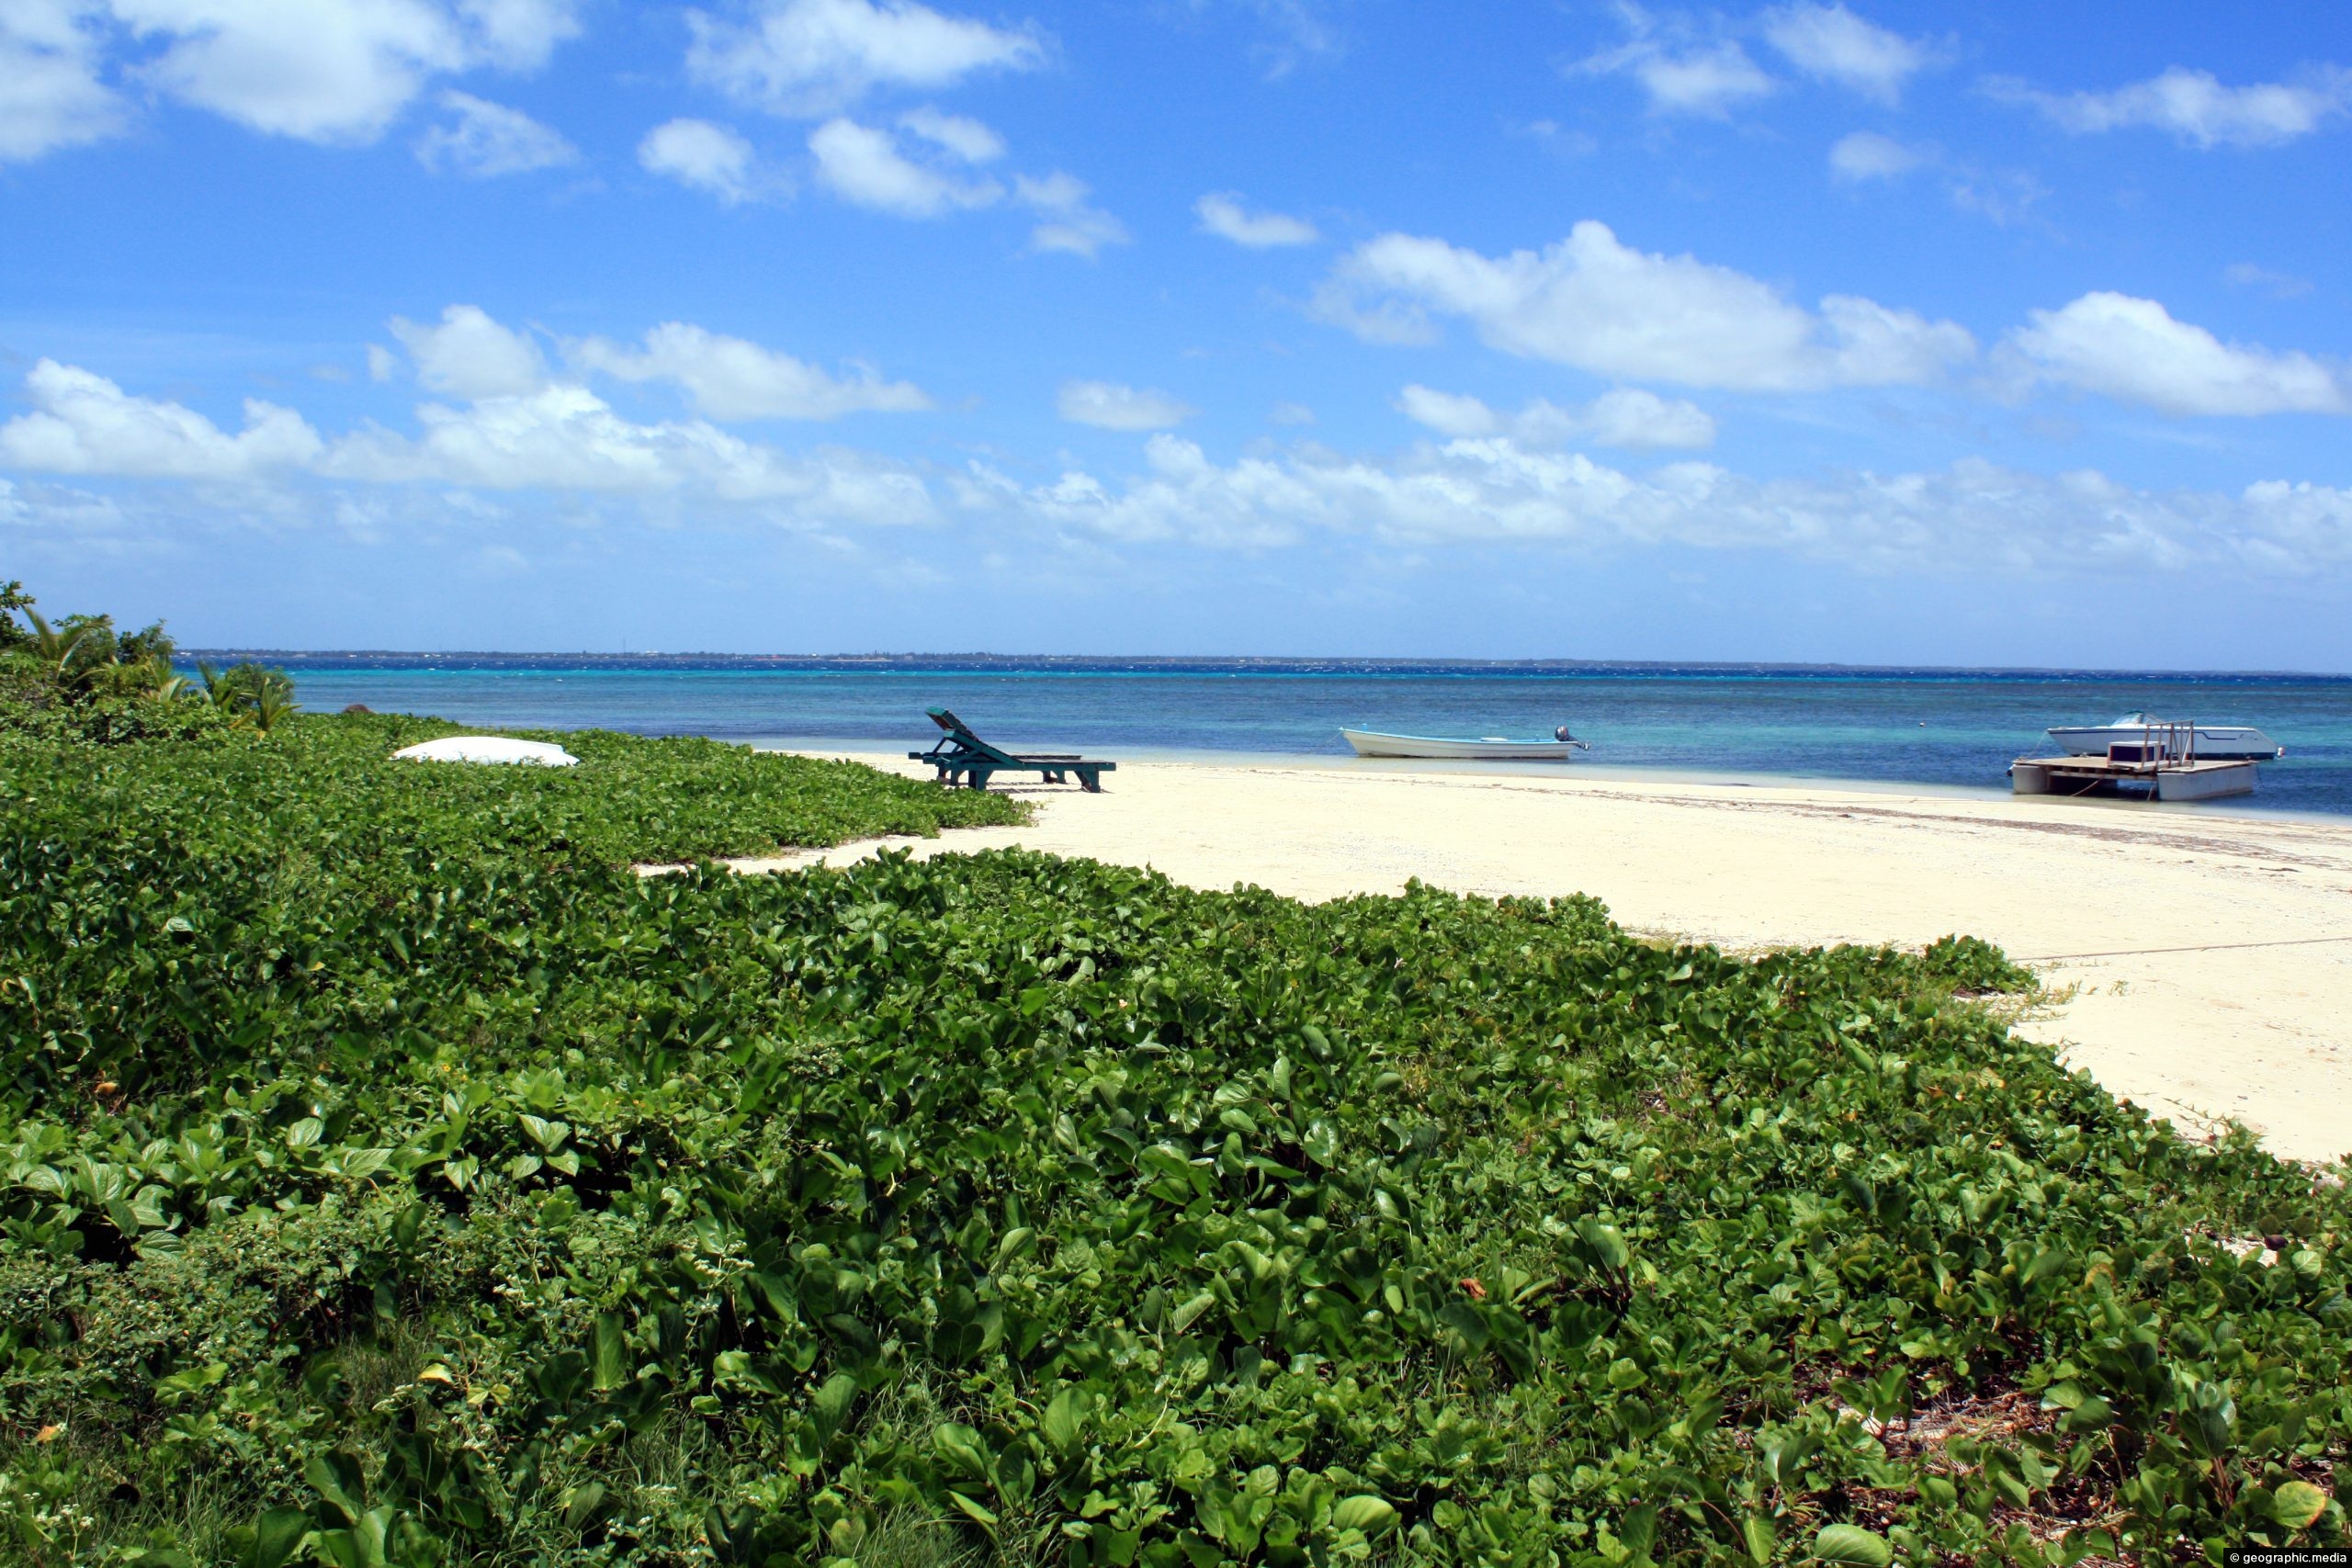 Low lying vegetation and white sand